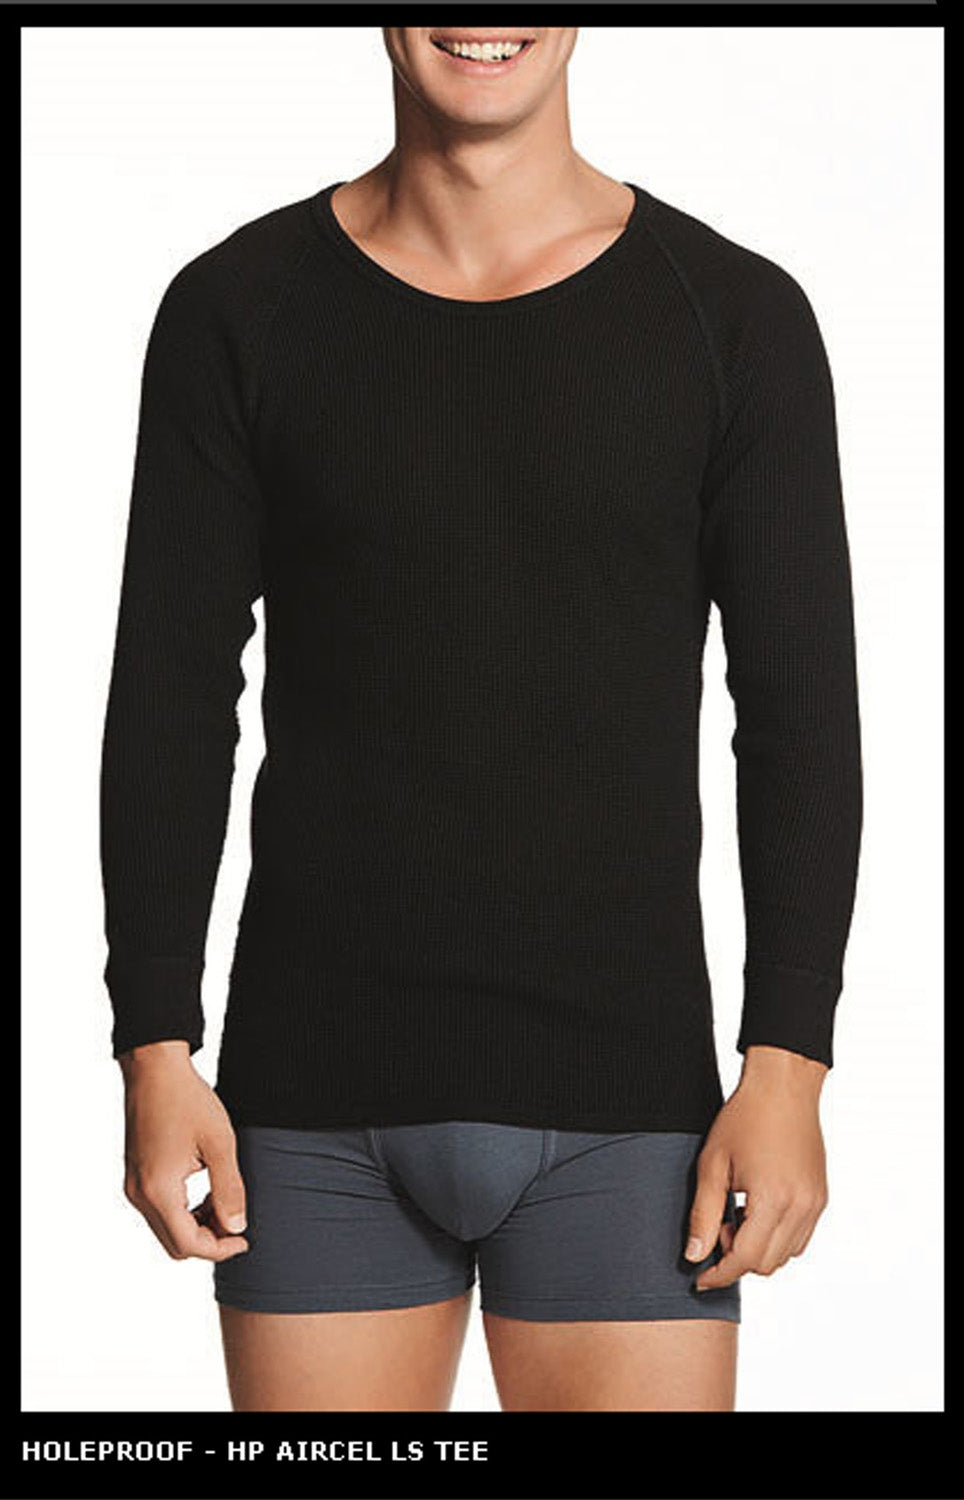 Holeproof Aircel Thermal Long Sleeve T-Shirt Mens Underwear by Holeproof | The Bloke Shop